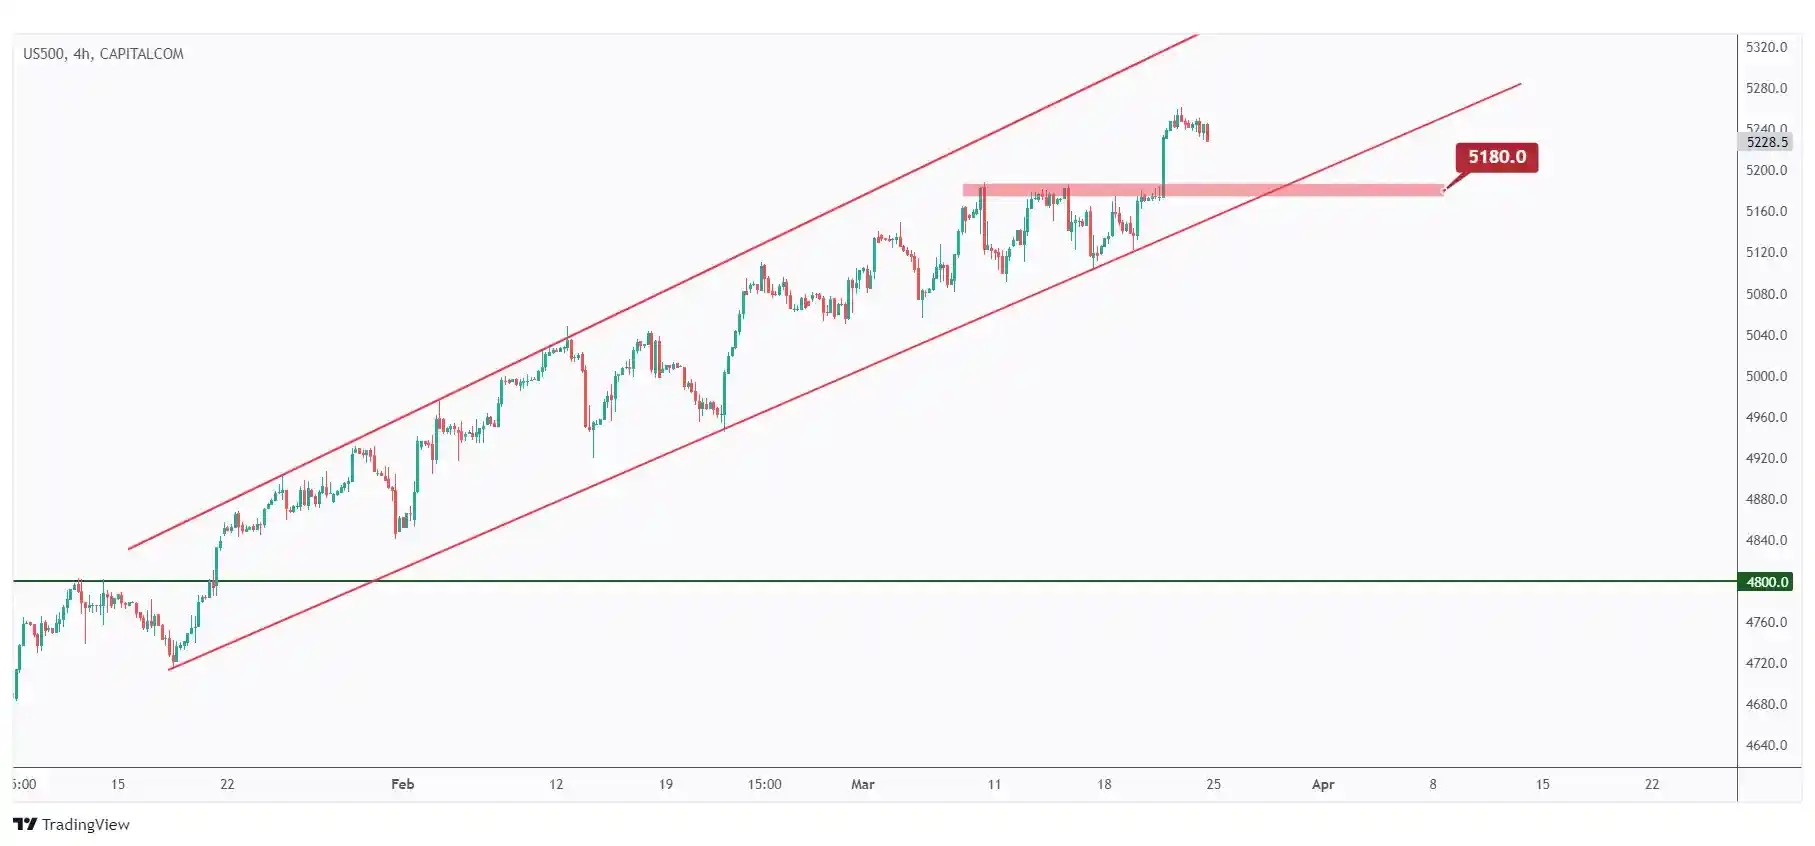 US500 4h chart overall bullish trading within the rising channel as long as the $5180 low holds.